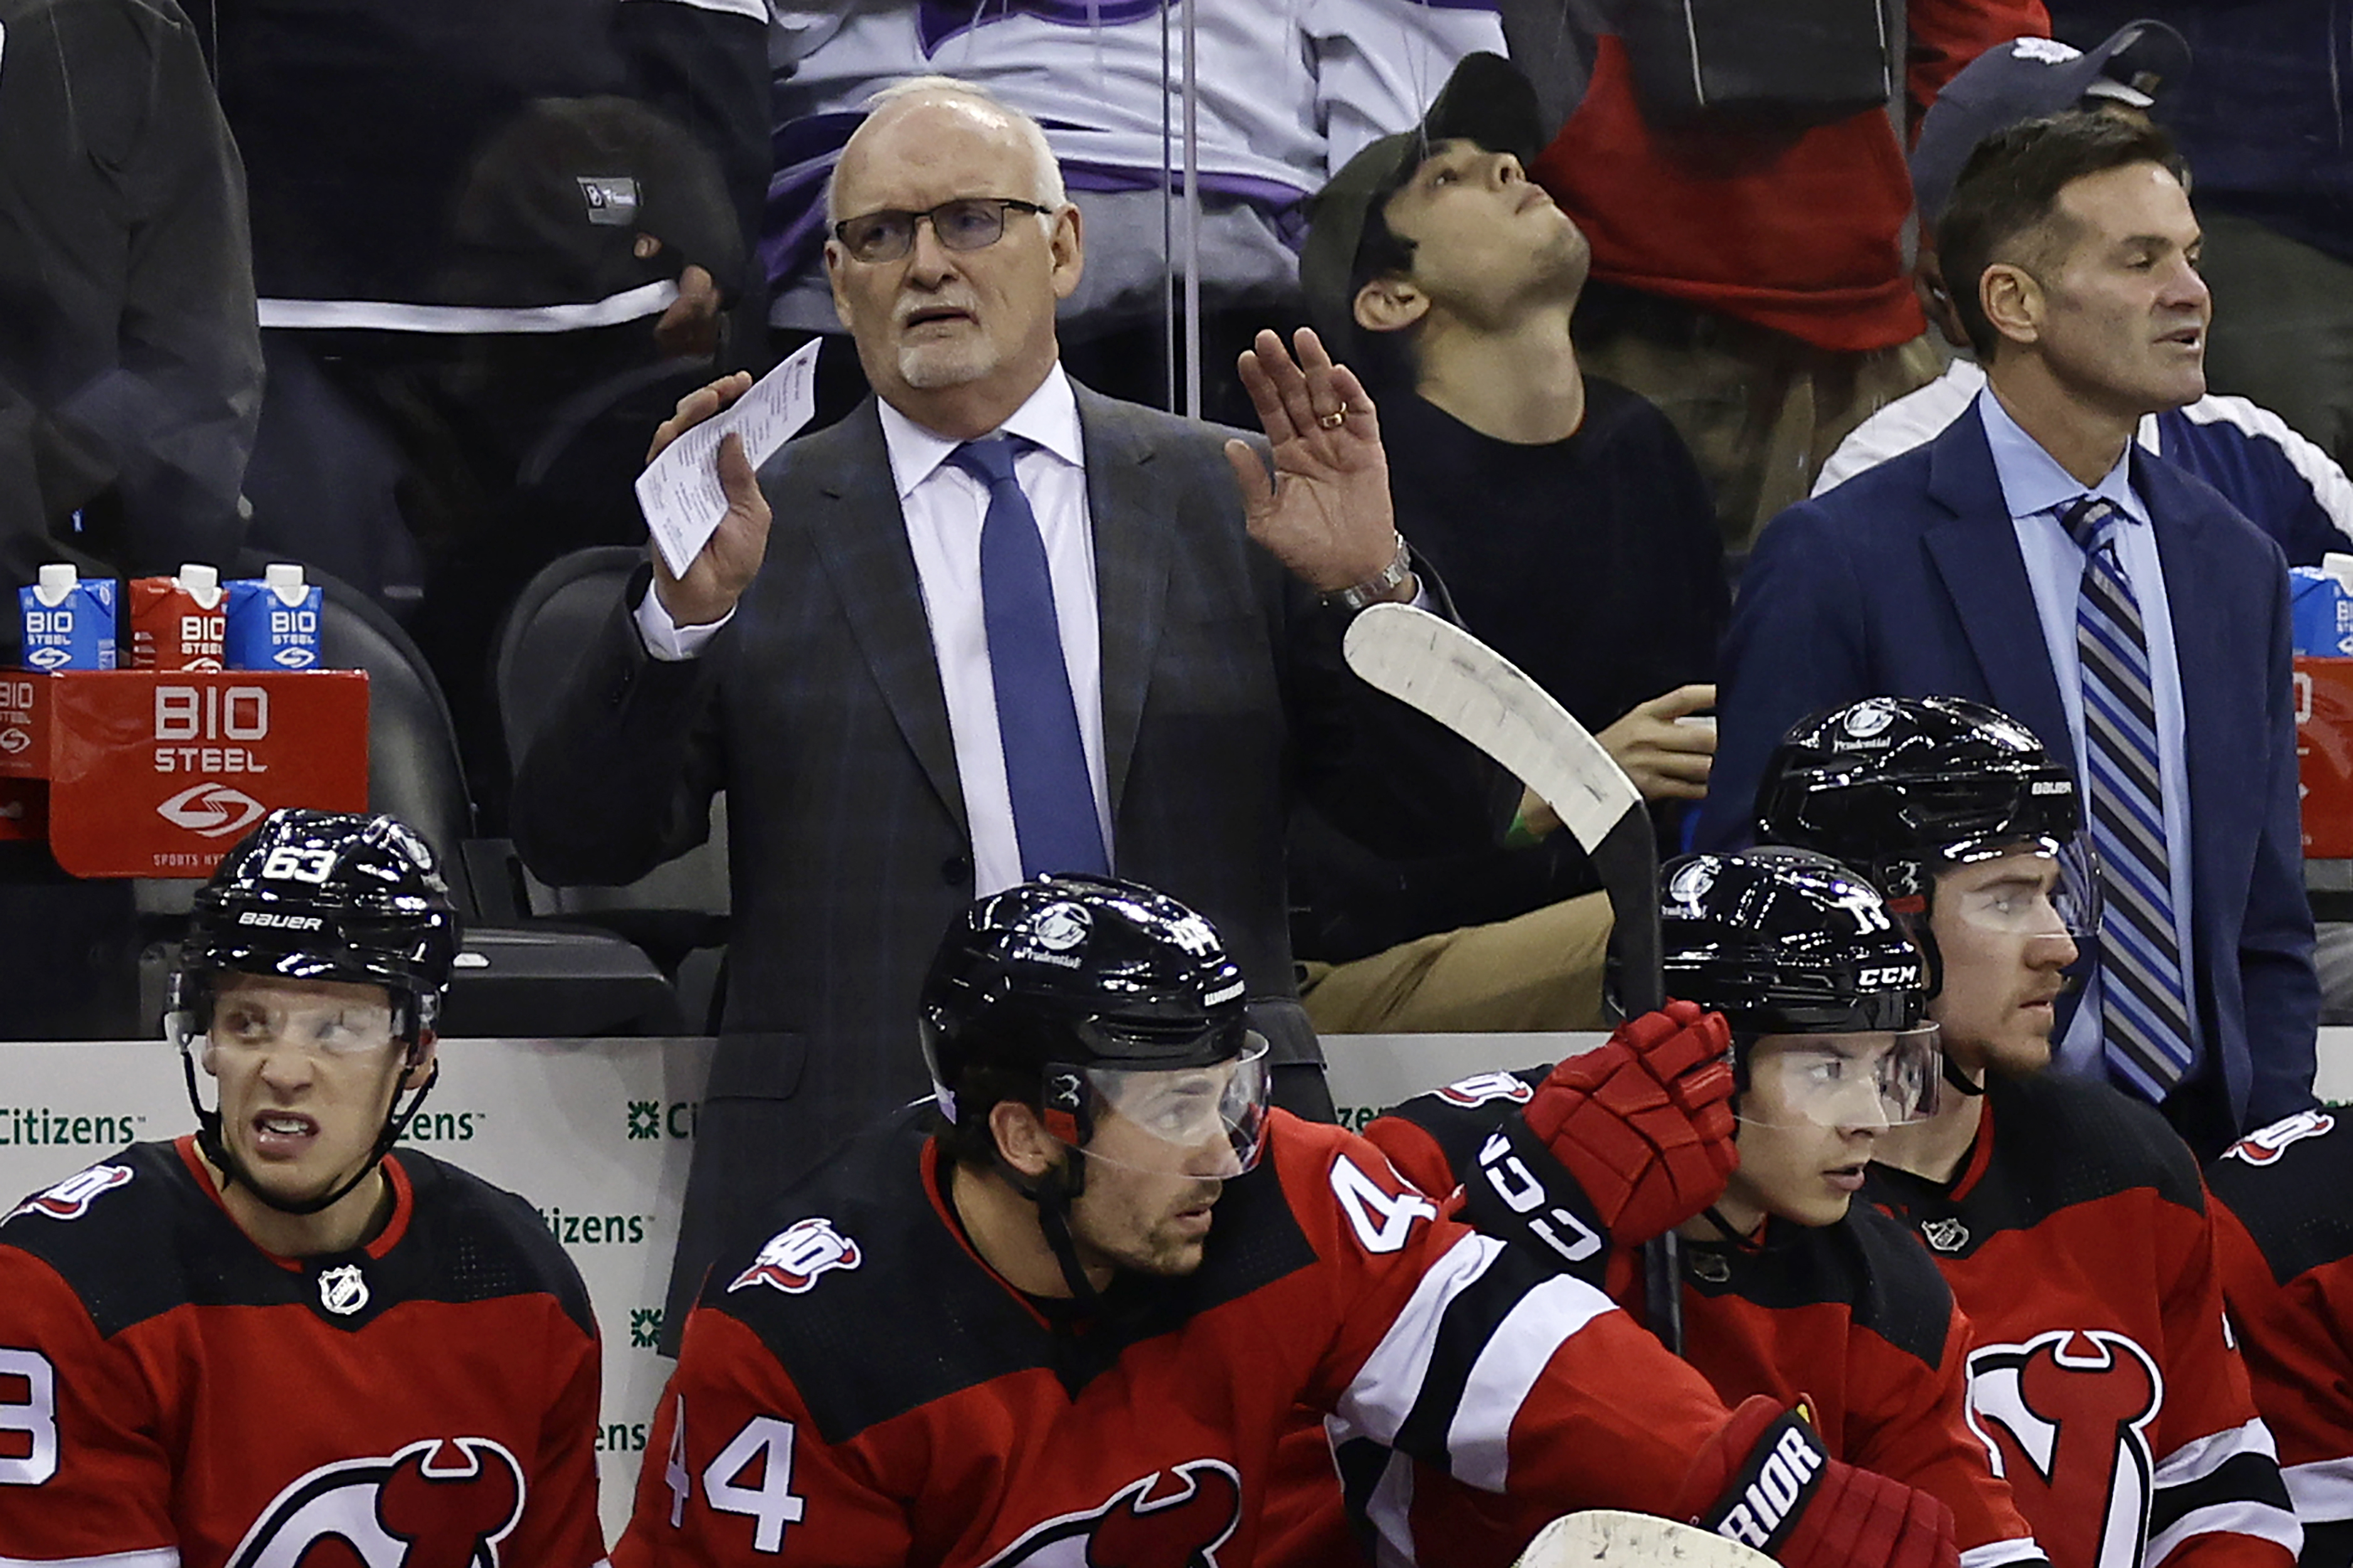 SIMMONS: Young New Jersey Devils give older Maple Leafs a lesson